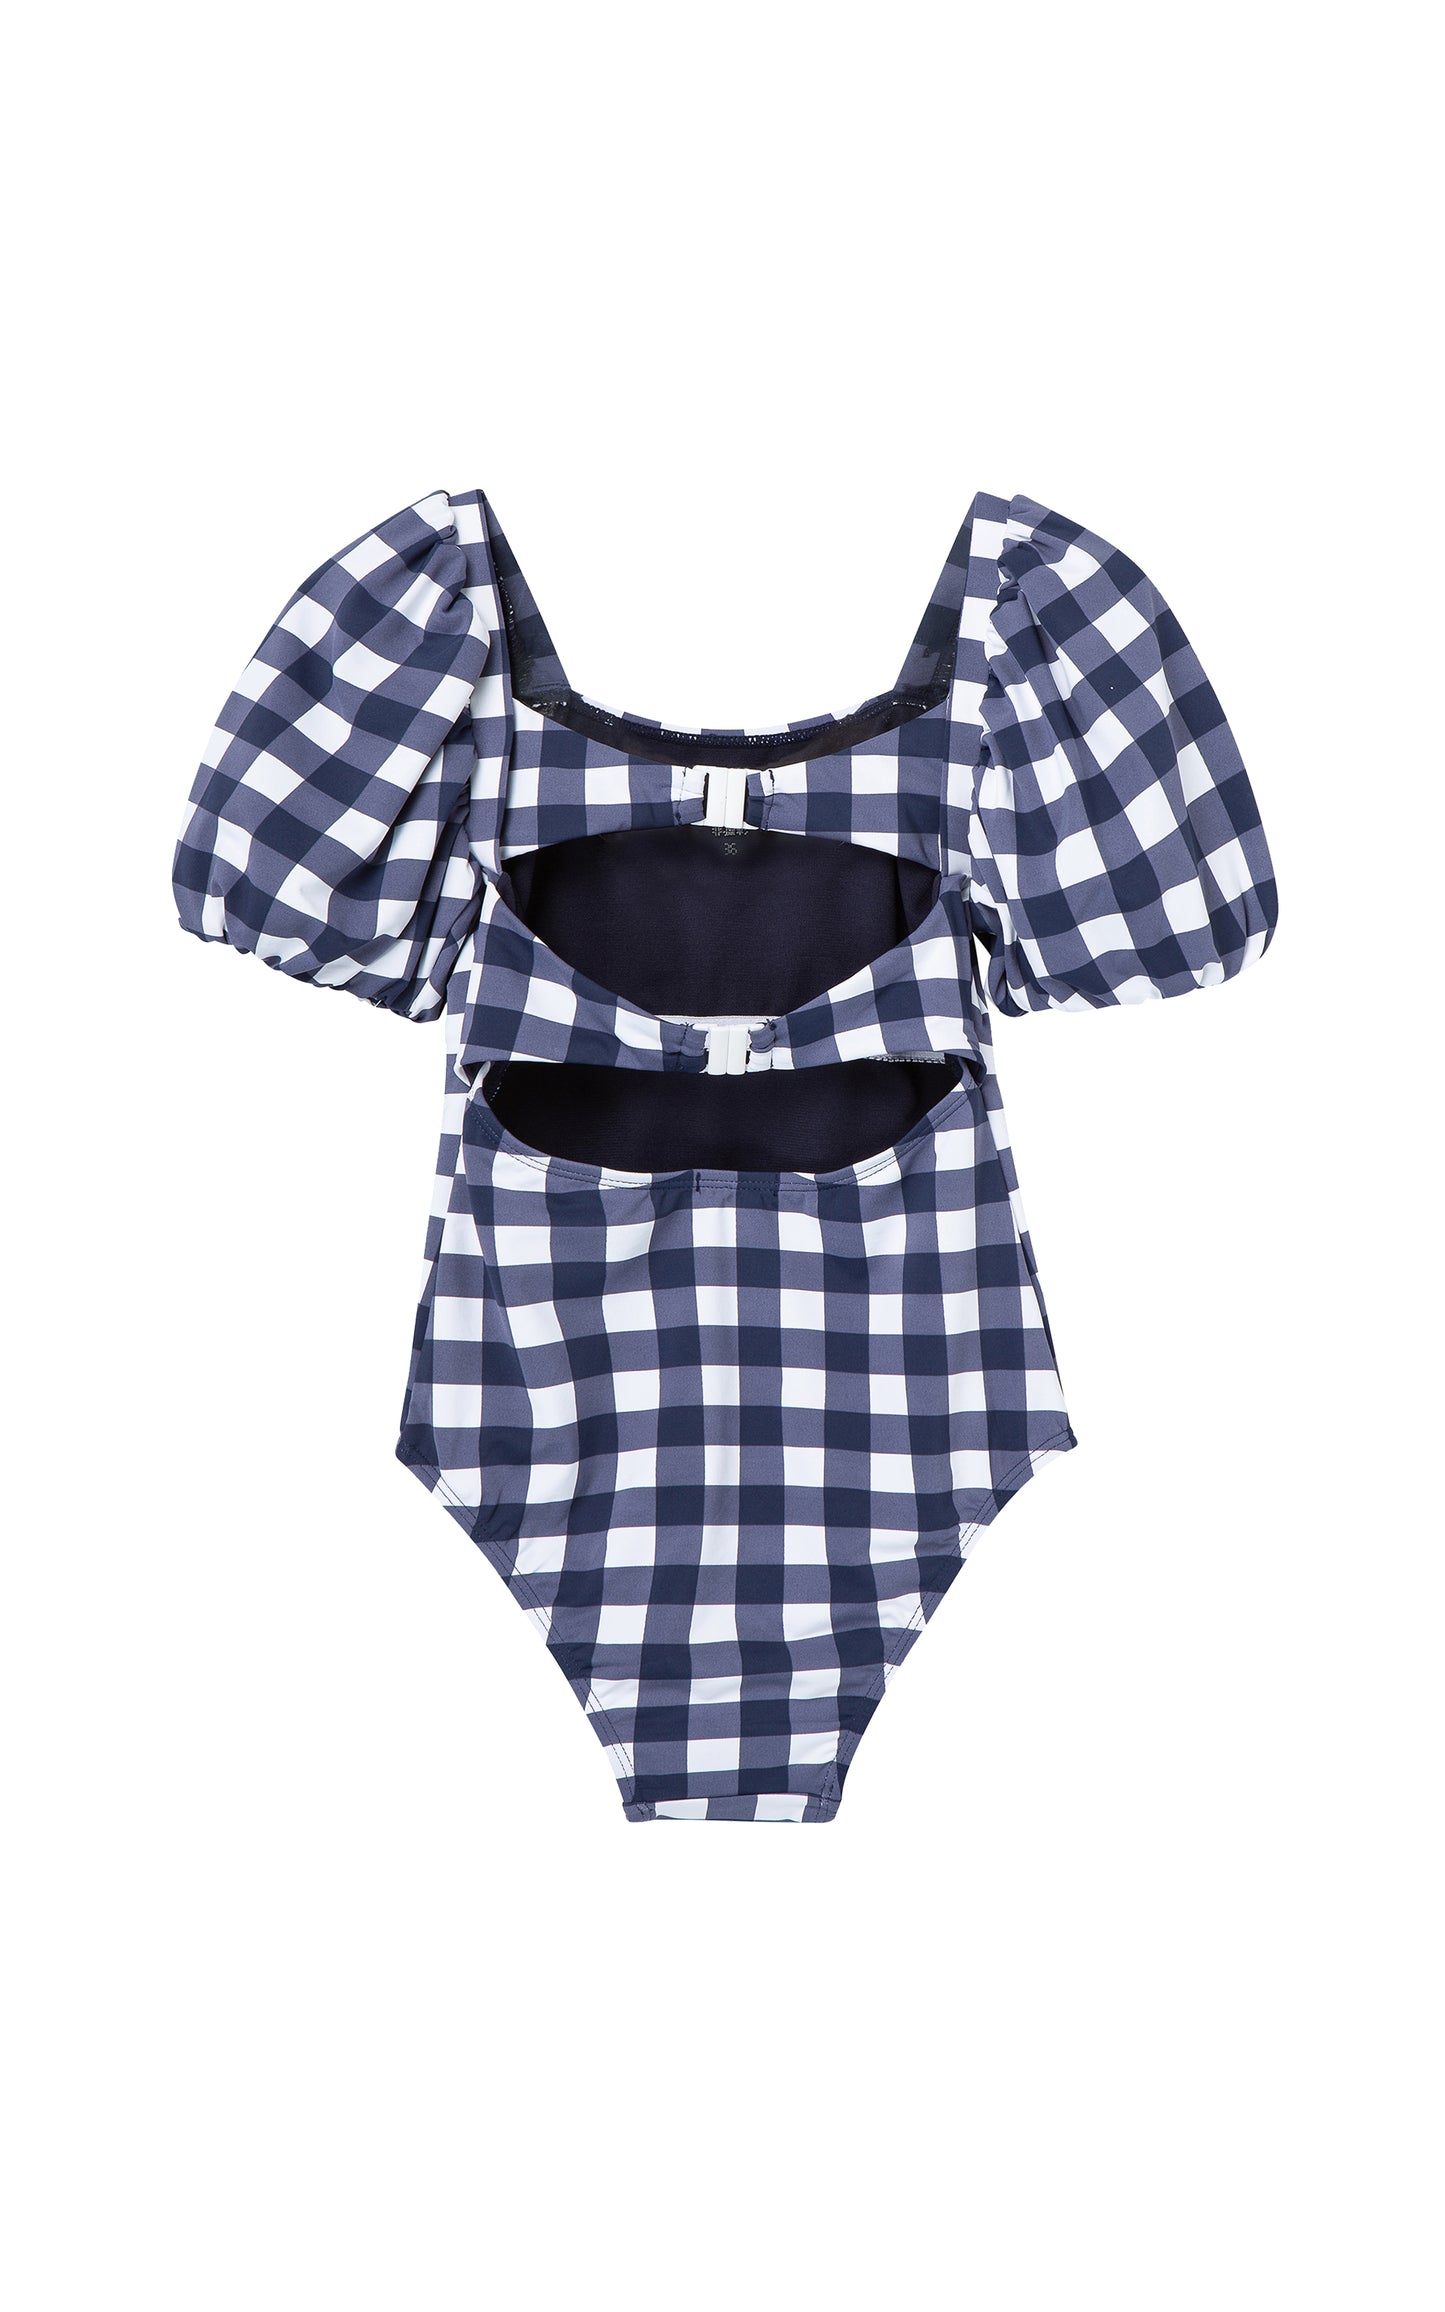 Back of navy-and-white gingham one-piece swimsuit with bubble sleeves